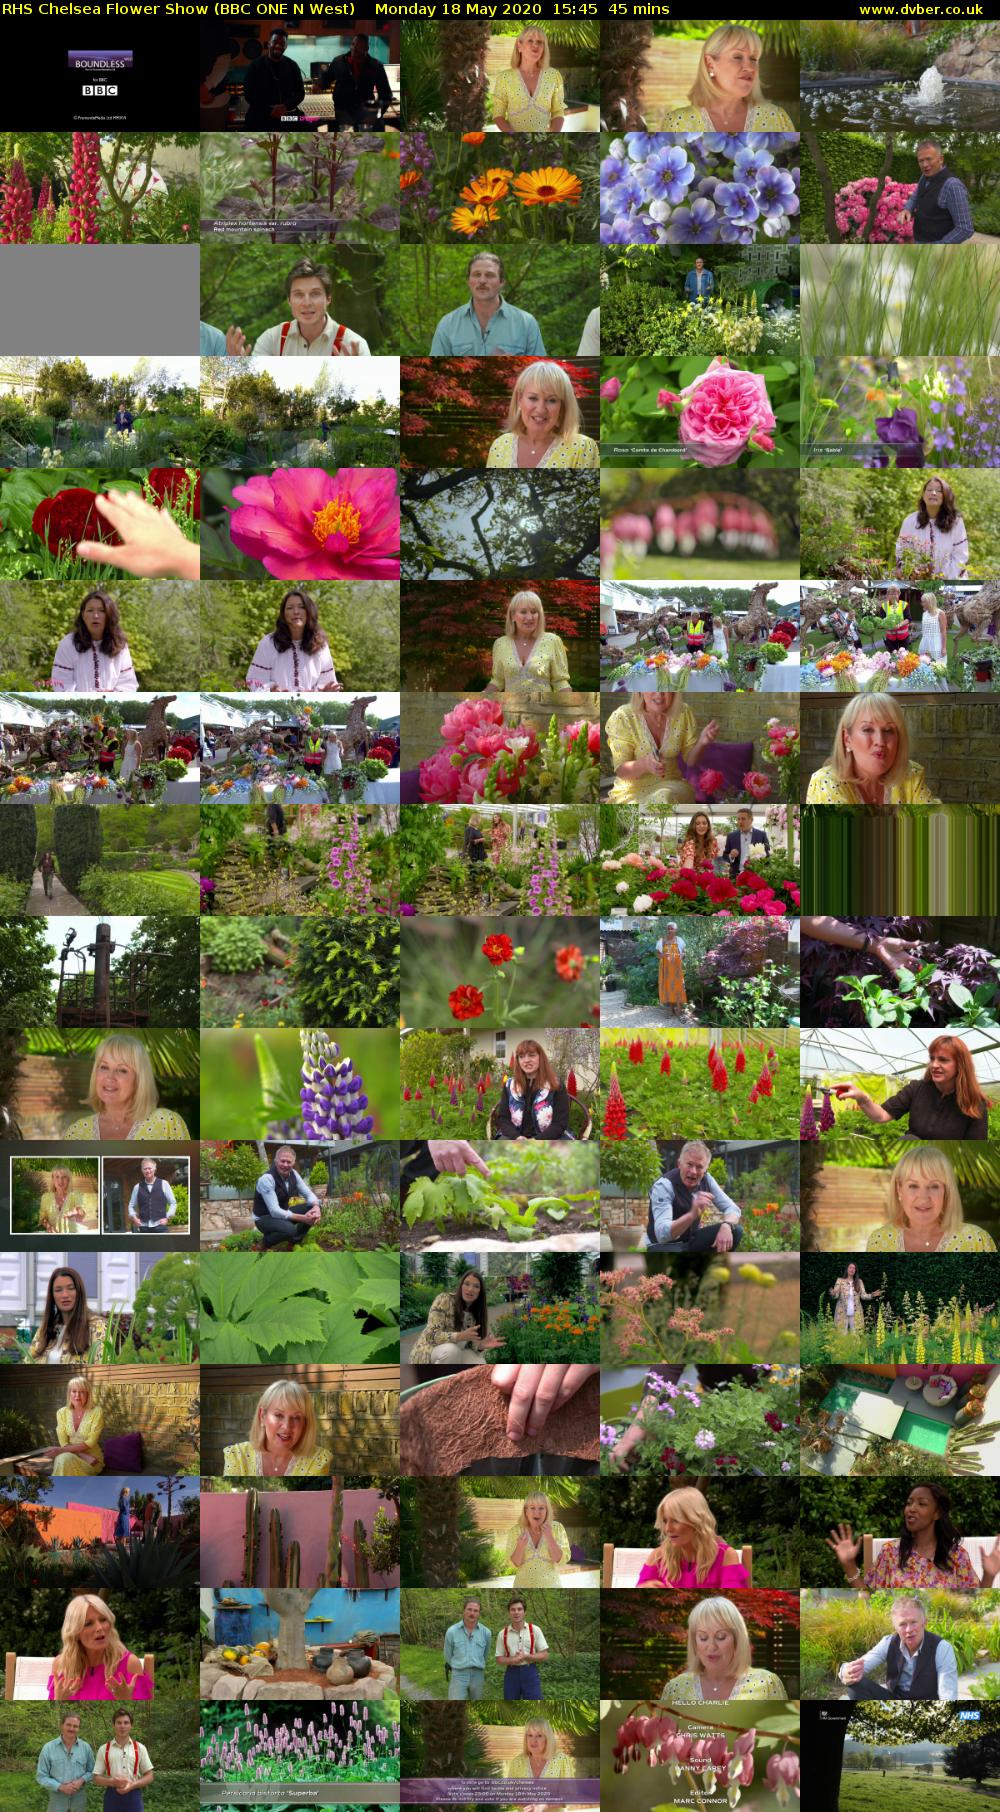 RHS Chelsea Flower Show (BBC ONE N West) Monday 18 May 2020 15:45 - 16:30